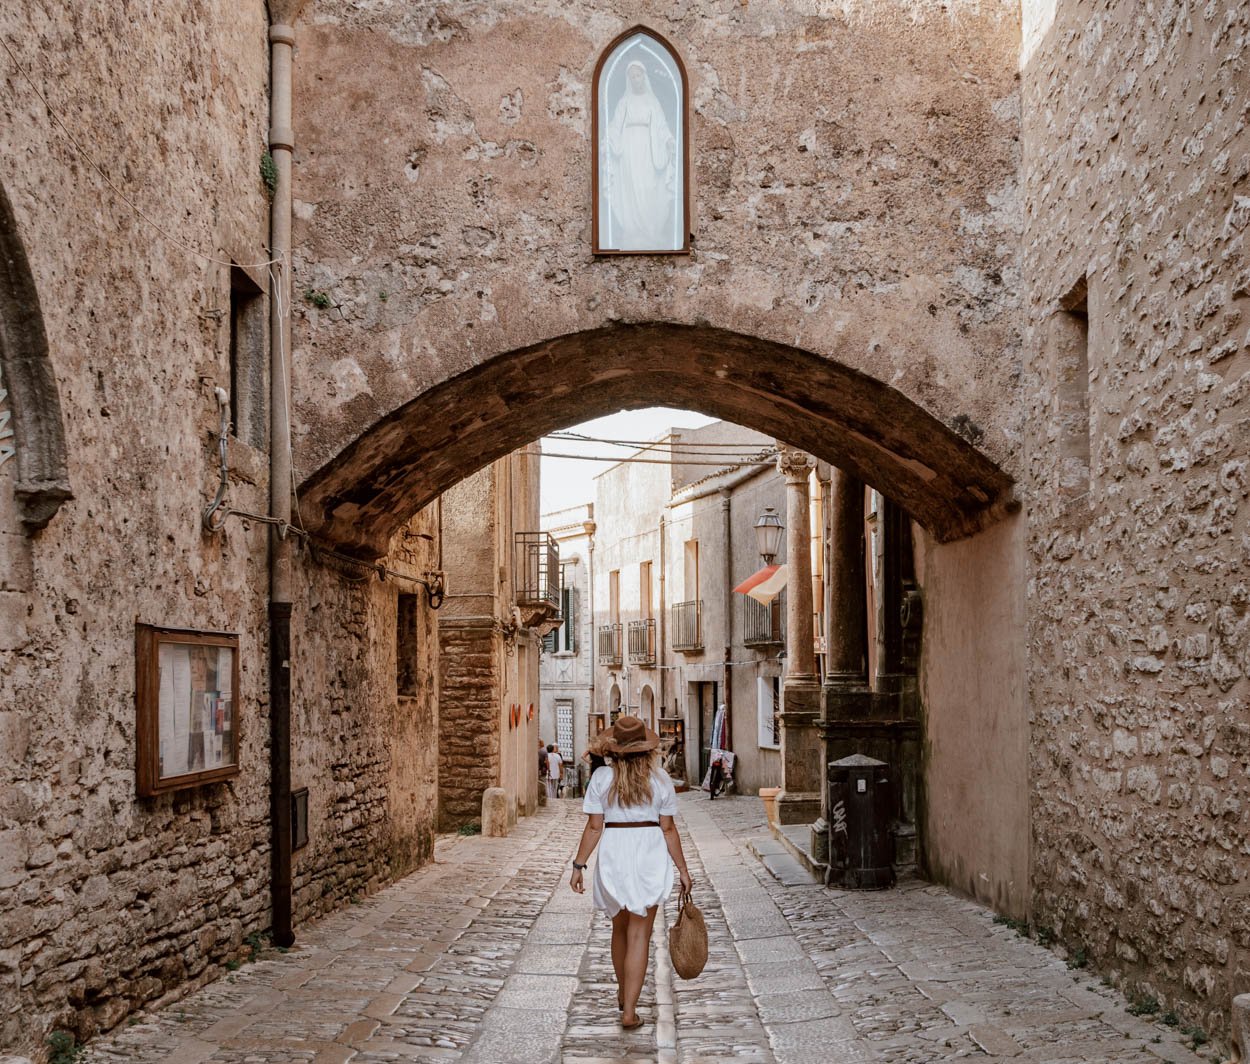 Exploring the tiny streets in Erice